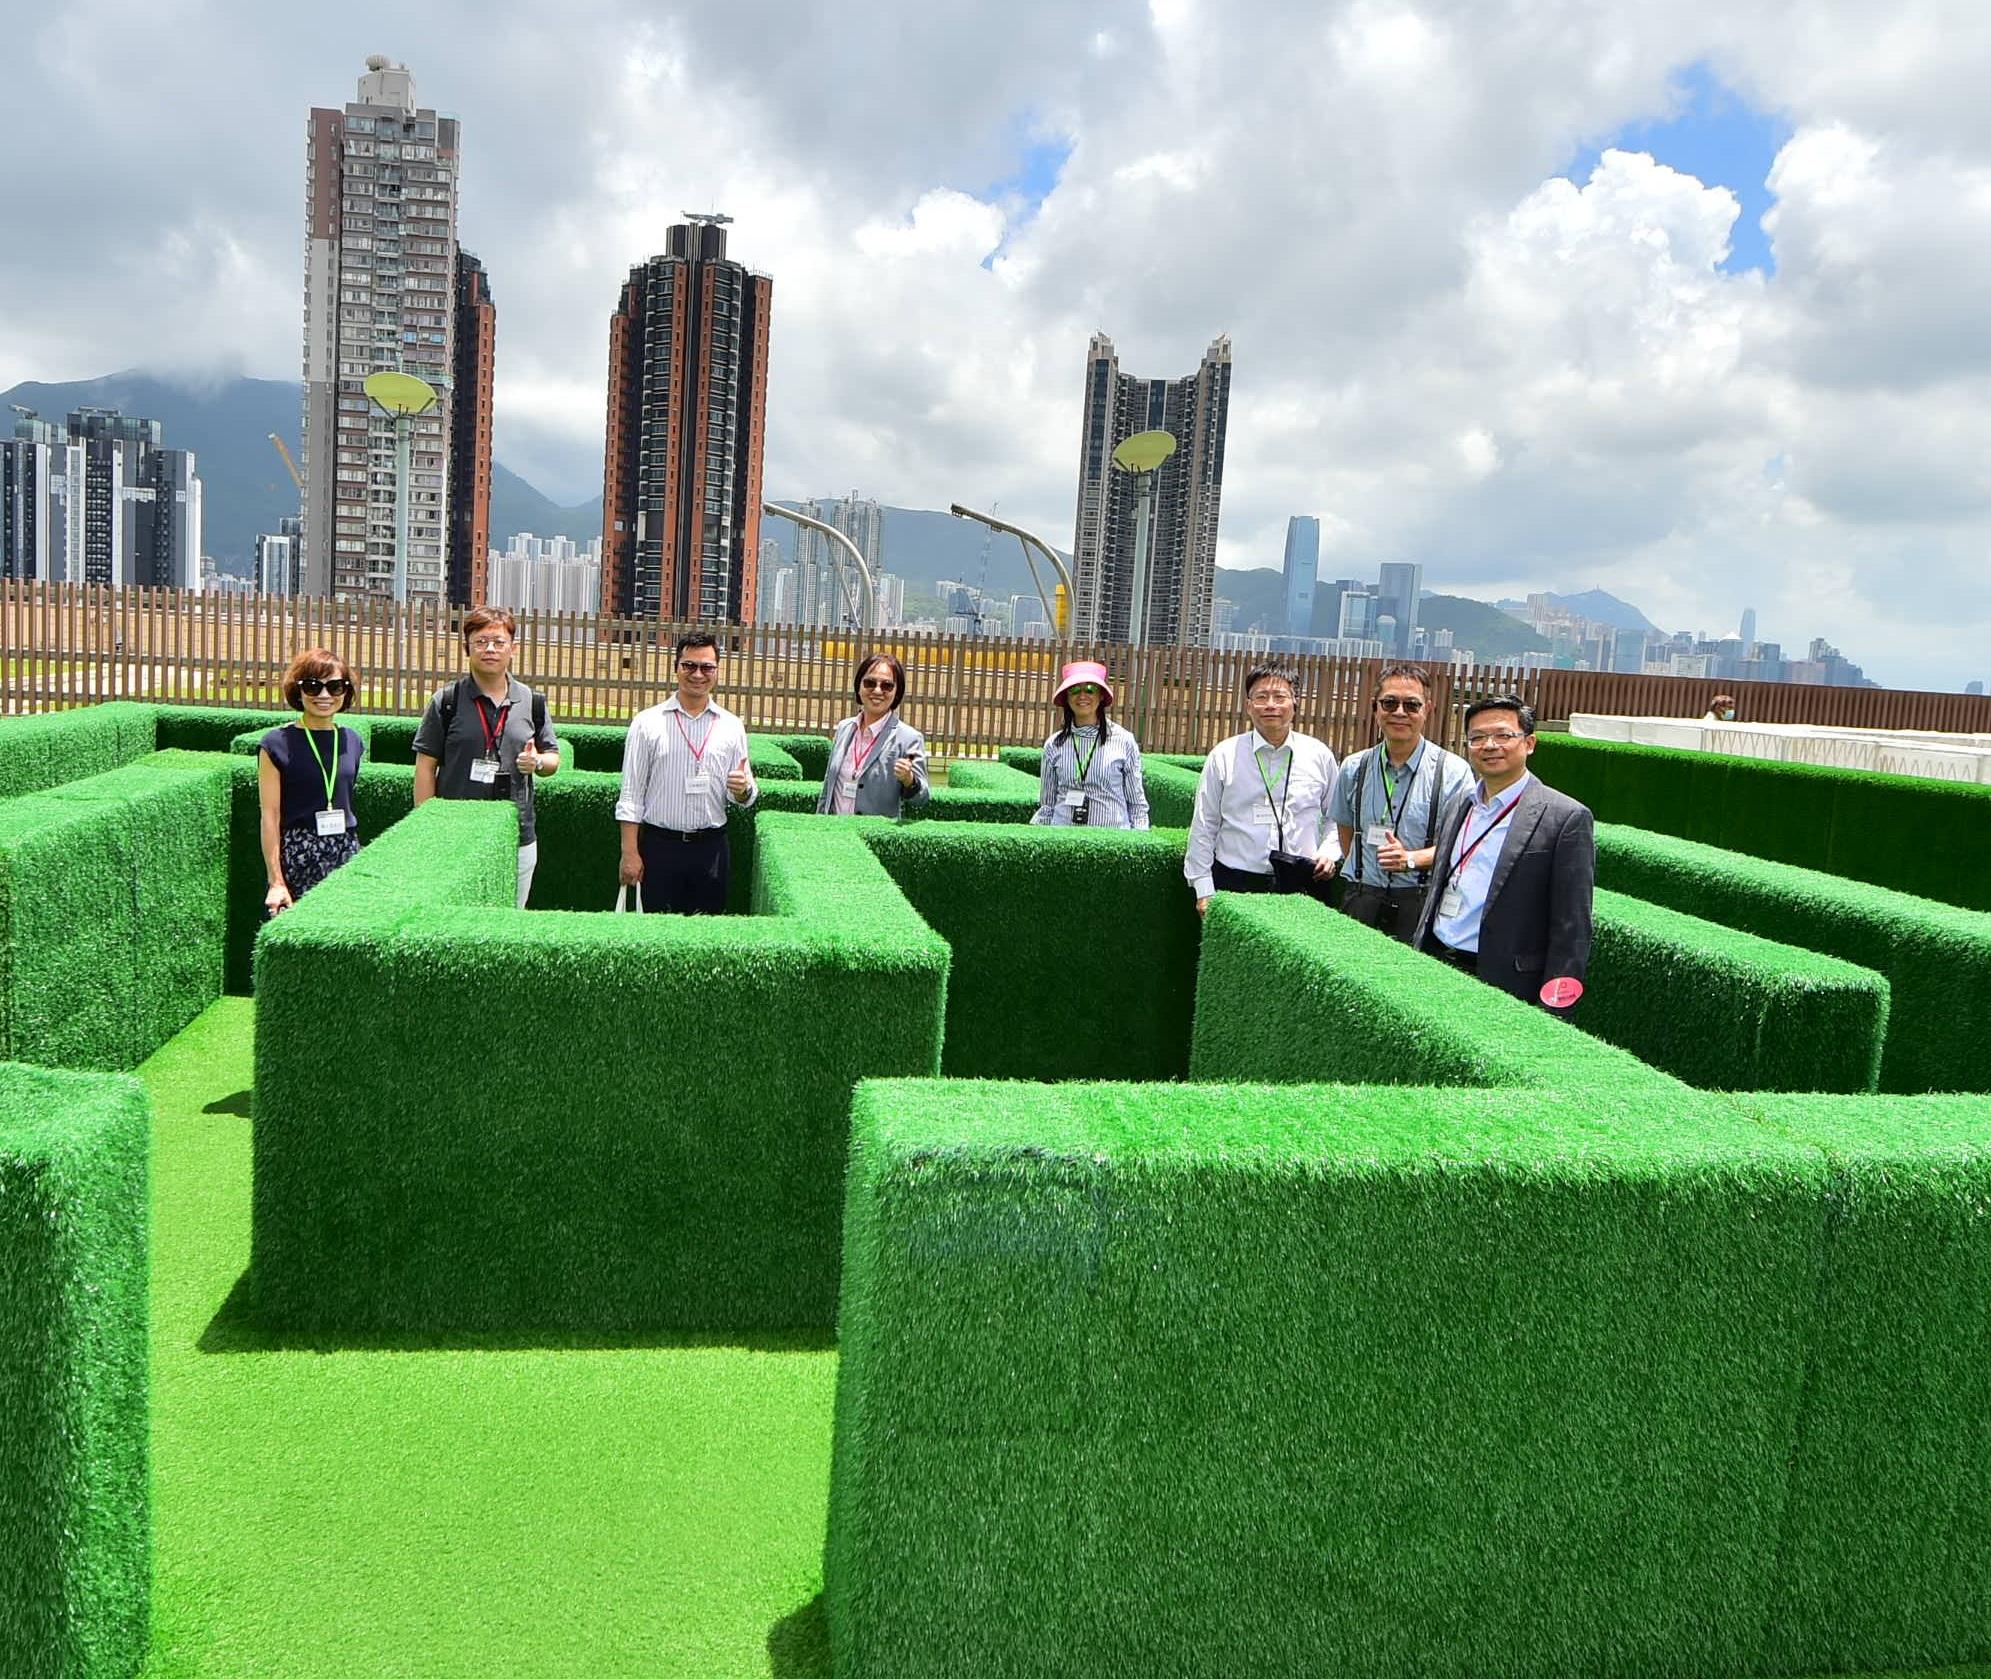 Members of the Hong Kong Housing Authority (HA) and its Commercial Properties Committee (CPC) today (June 20) visited the HA's flagship shopping mall, Domain, in Yau Tong. Photo shows the Chairman of the CPC, Ms Serena Lau (fourth left), and members of the HA/CPC visiting the new addition of a labyrinth park at the rooftop garden of Domain.